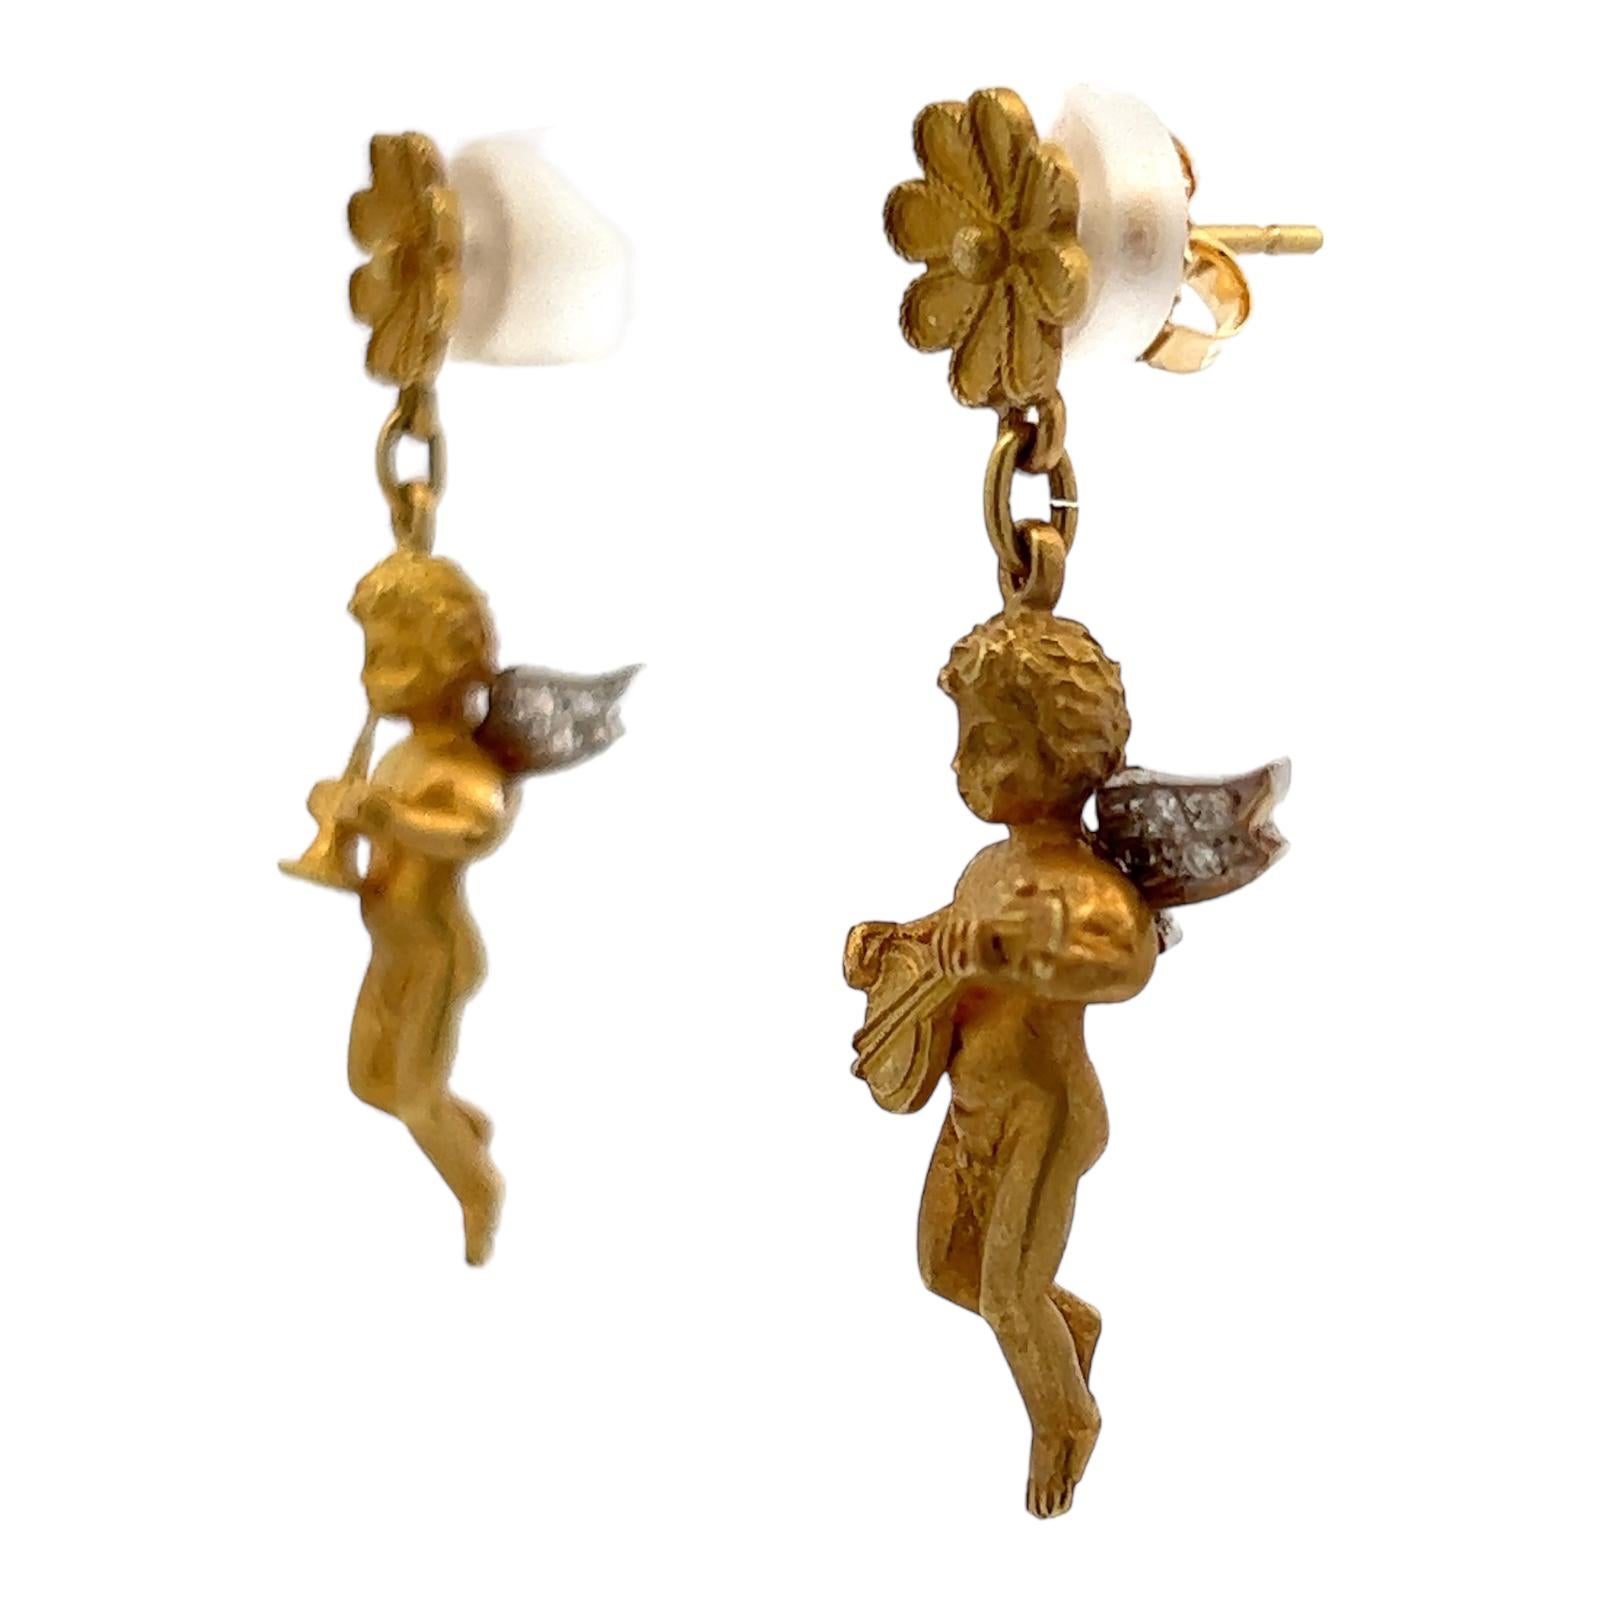 Unique and beautiful diamond drop earrings handcrafted in 18 karat yellow gold. The cherubs are playing instruments and their wings are accented with 12 round brilliant cut diamonds weighing approximately .12 CTW. The diamonds are graded G-H color